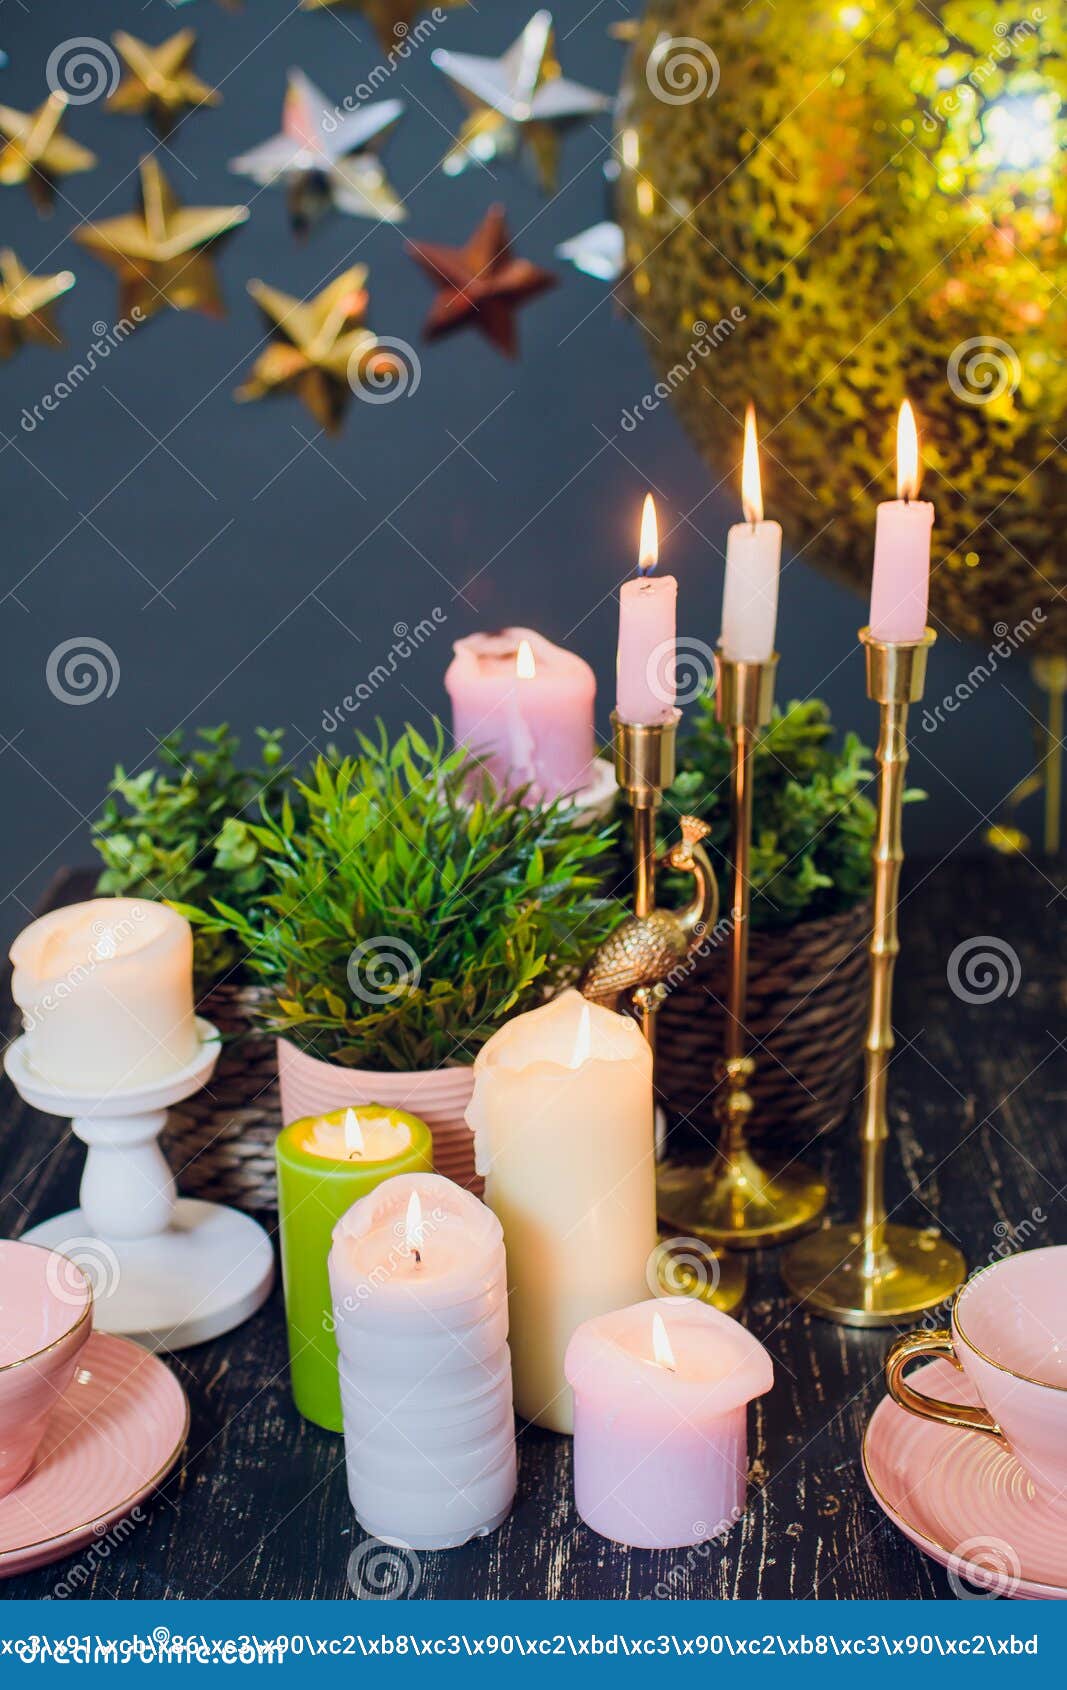 Christmas Decorations with a Candles. Stock Photo - Image of decor ...